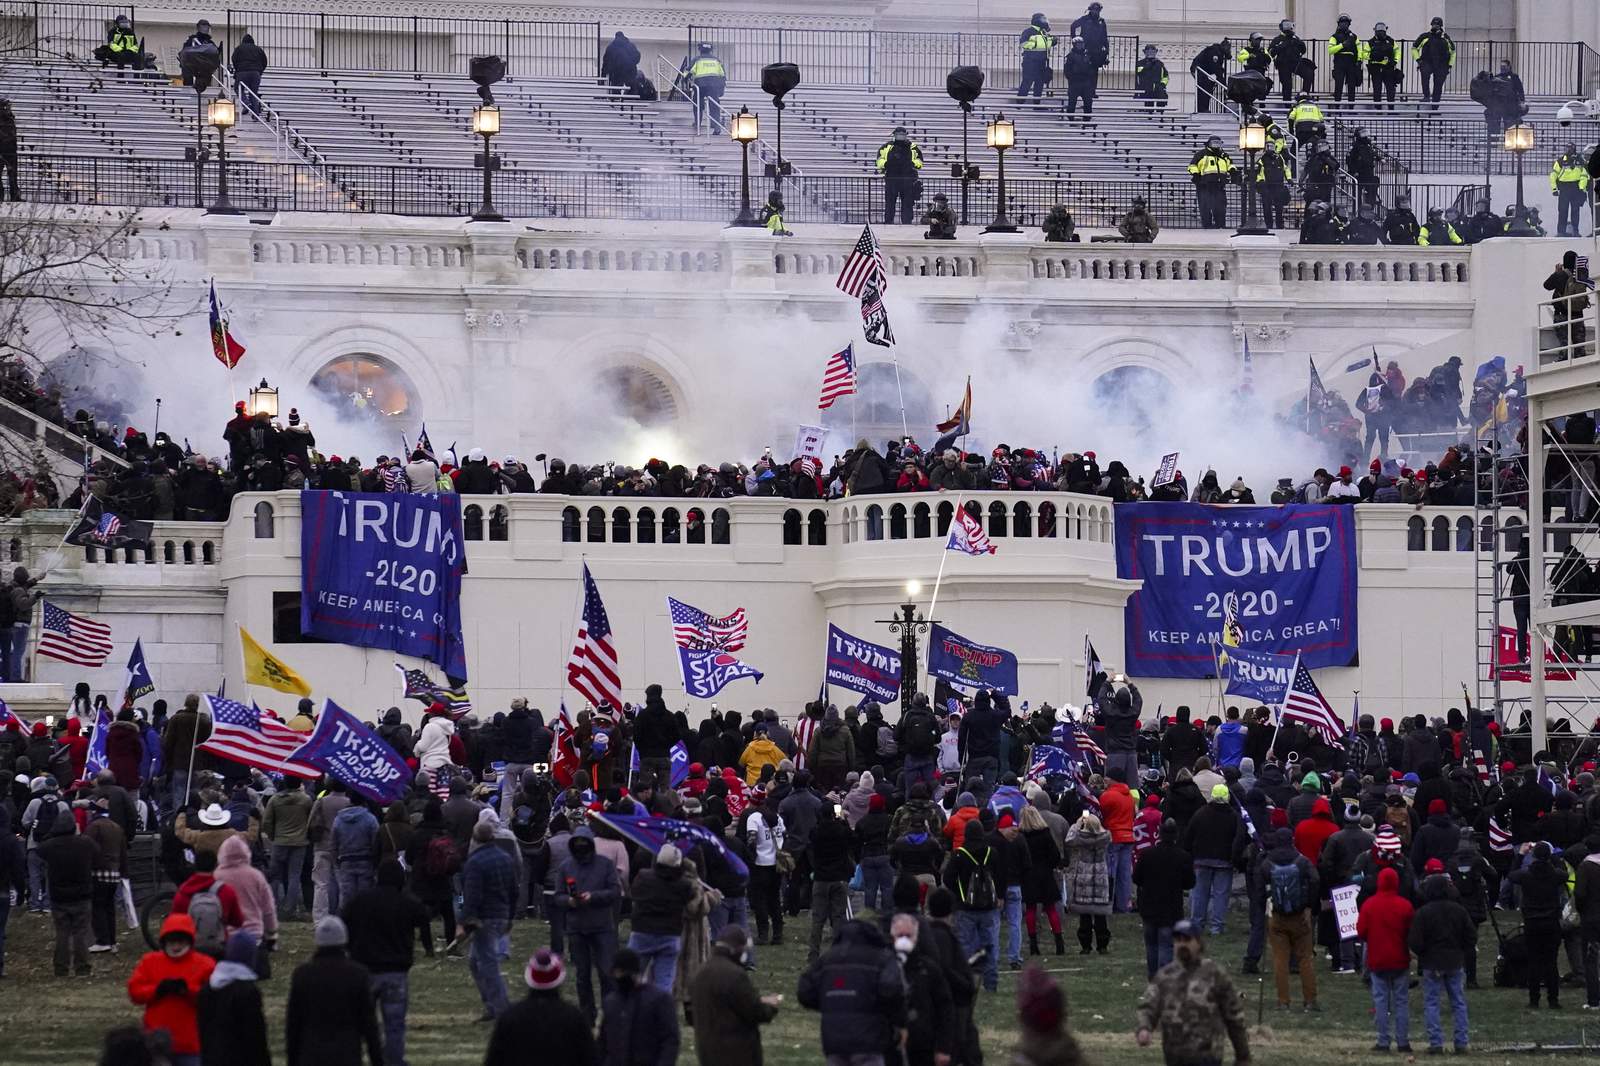 US Capitol Police says officer died from injuries after responding to violent ‘riots’